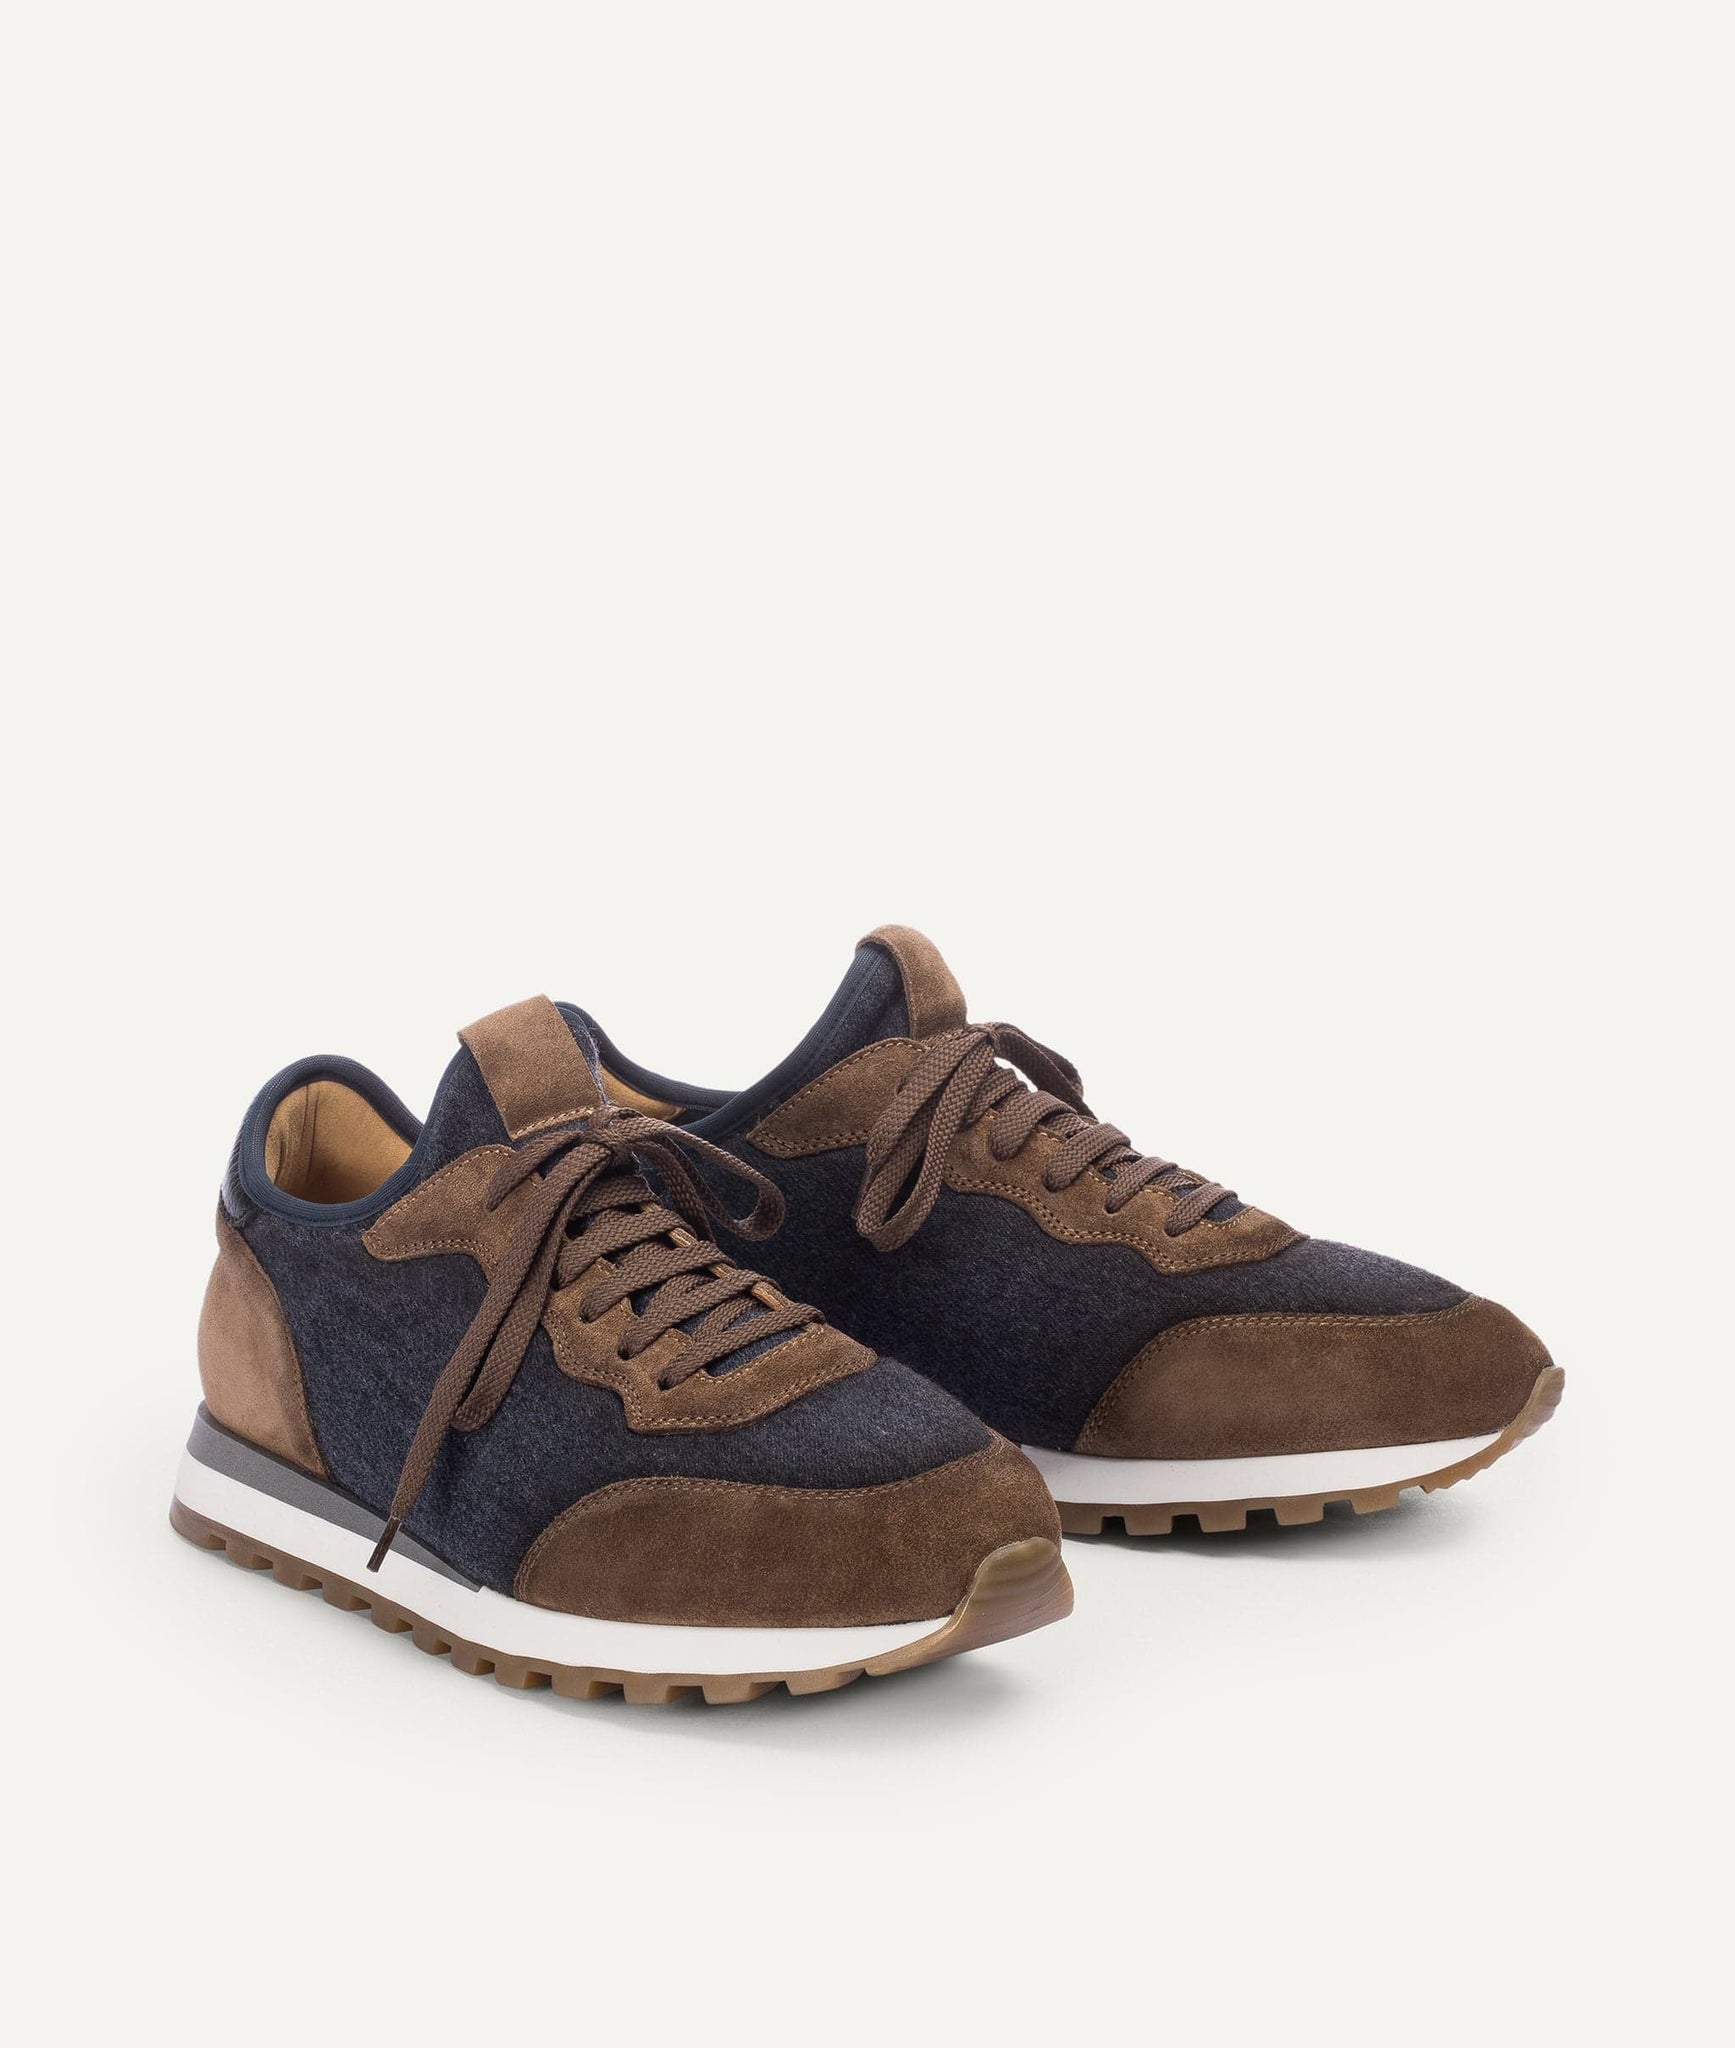 Runner in Wool and Suede